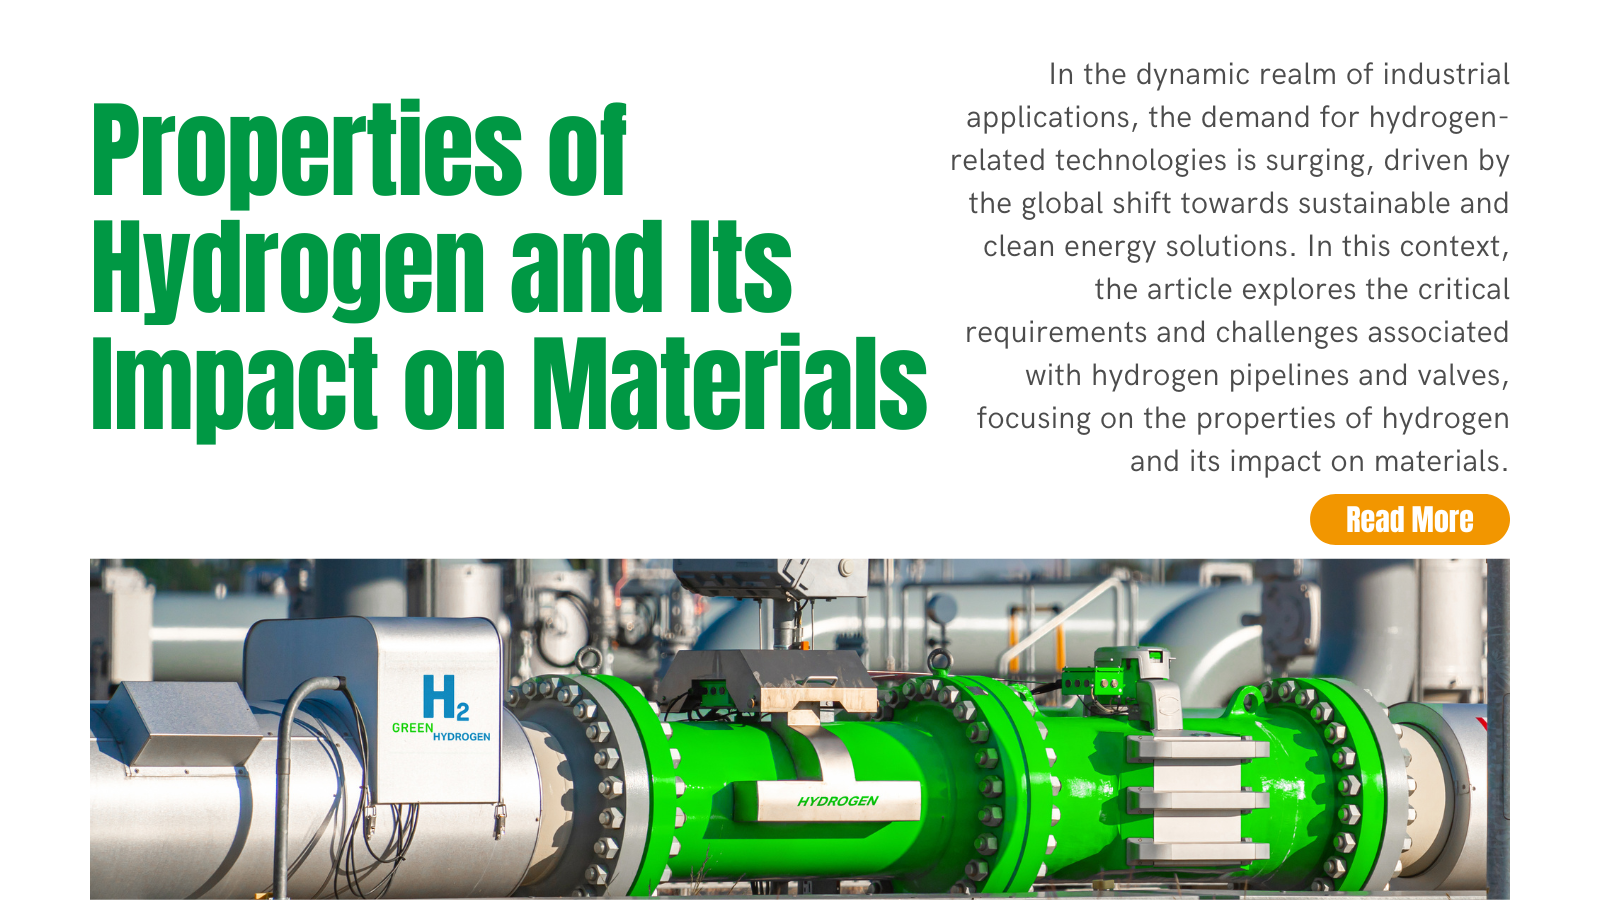 Requirements for Hydrogen Pipelines and Valves (Part 1) - Properties of Hydrogen and Its Impact on Materials | INOX-TEK